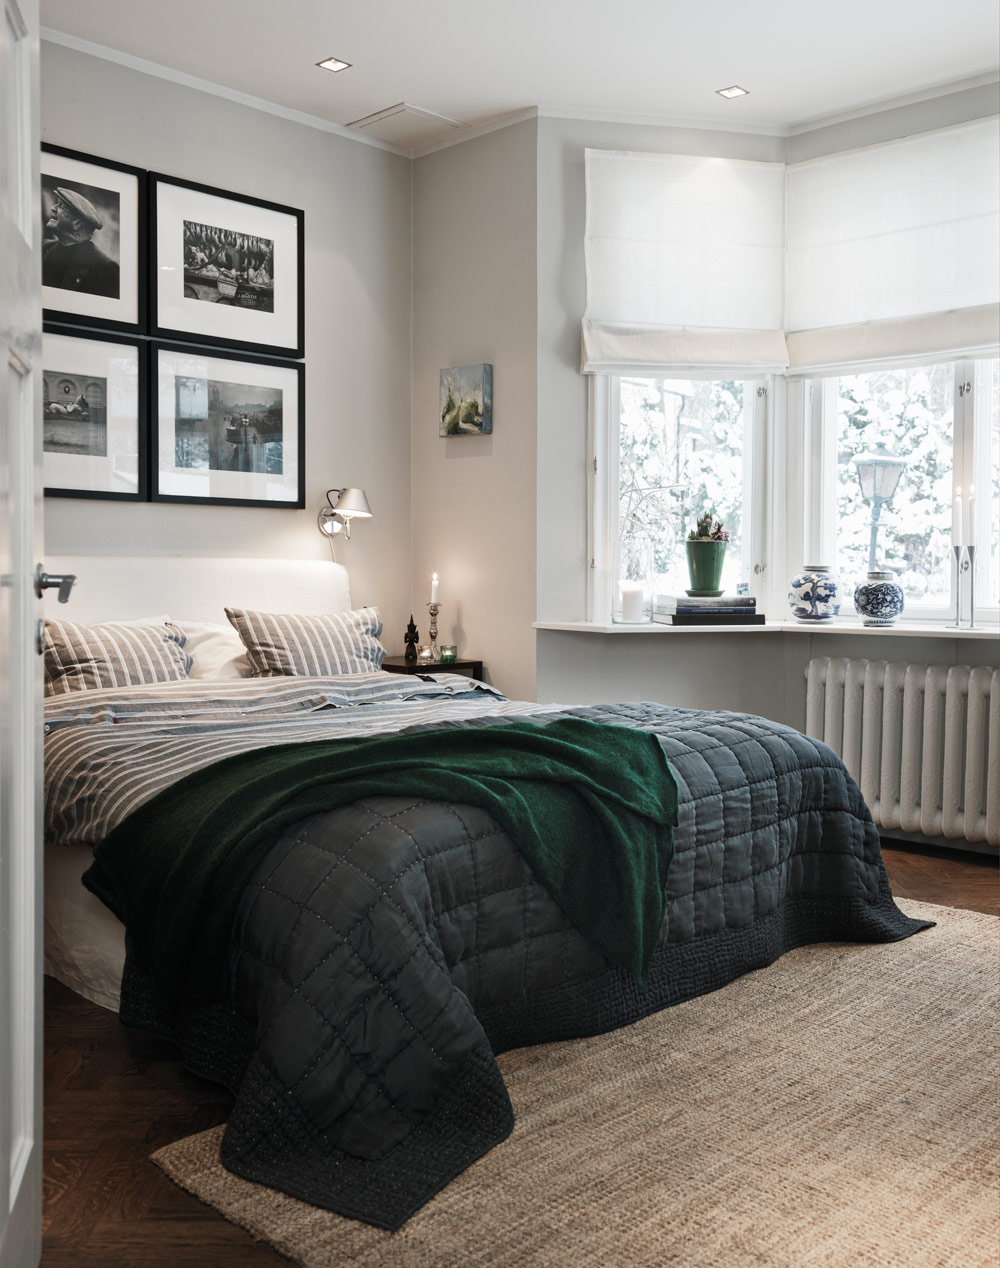 canada-goose-home-bedding-classic-swedish-scandinavian-nordic-style-cottage-inspiration-all-white-harringbone-parquet-pop-out-window-oval